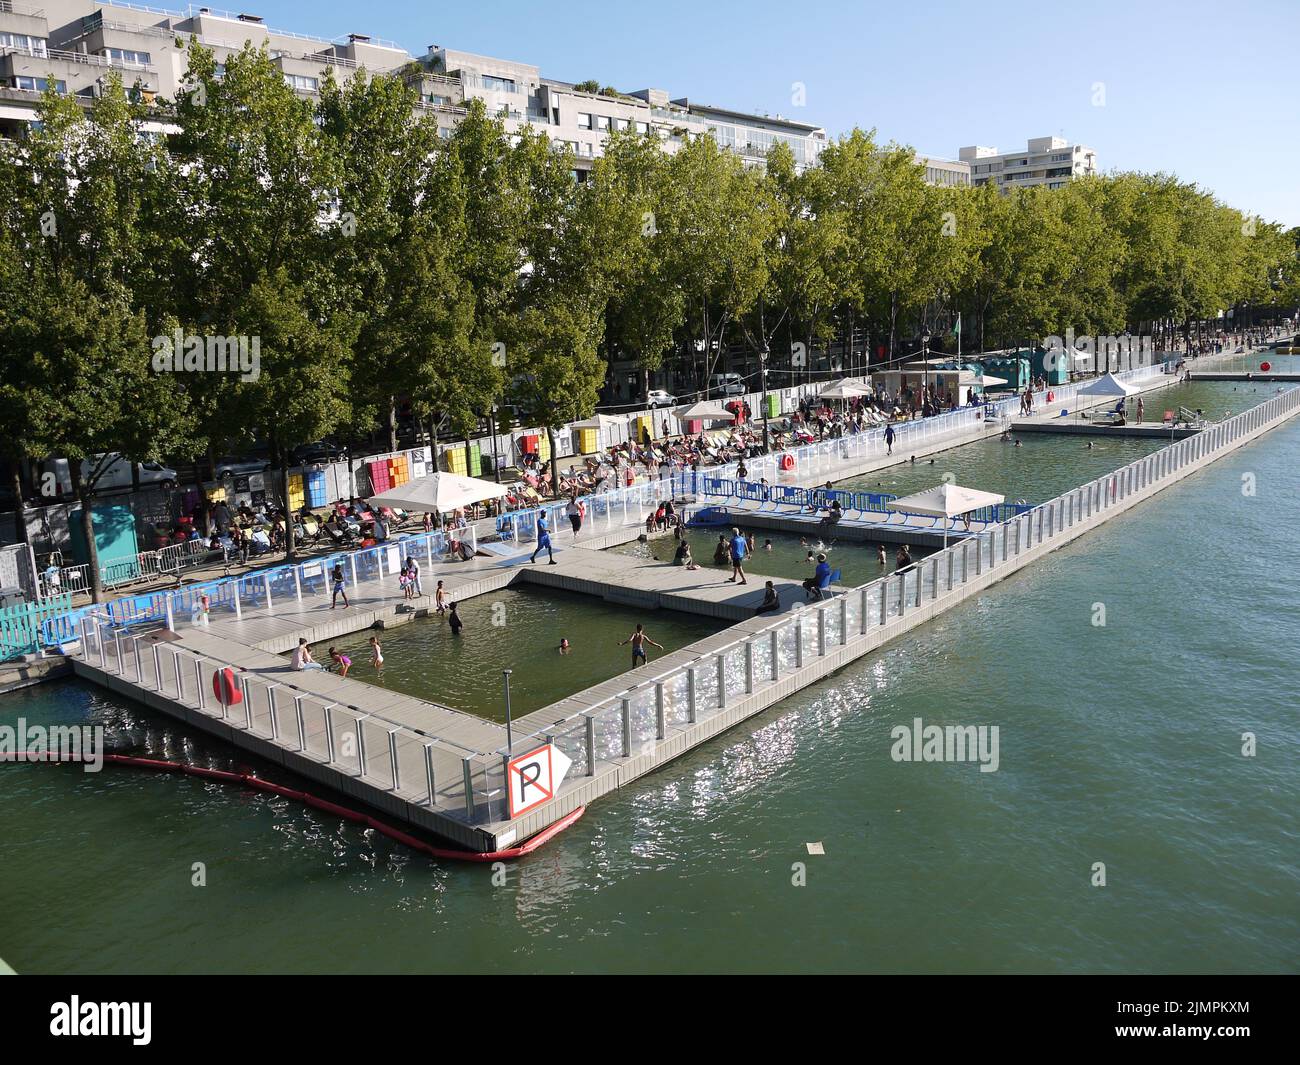 The free swimming pool installed in summer on the Bassin de la Vilette, north of Paris, during Paris-Plage Stock Photo